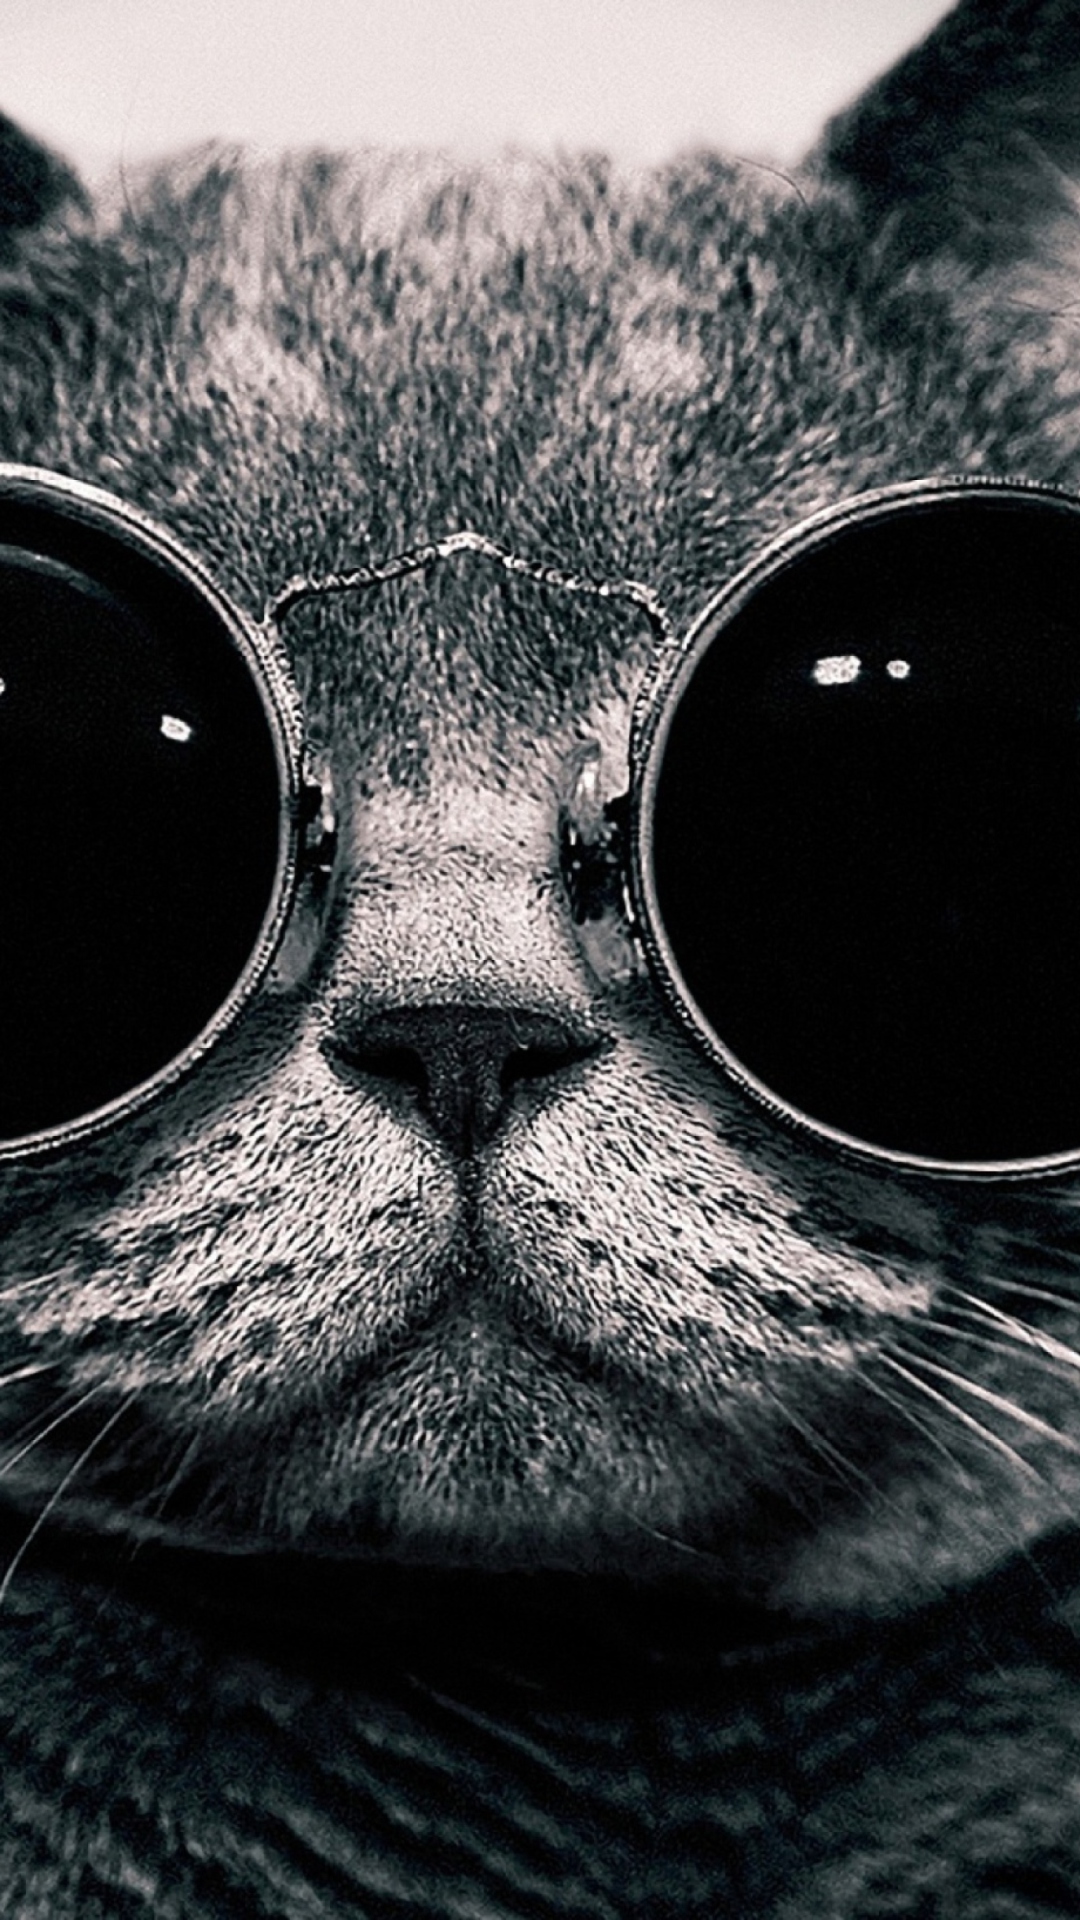 Das Cat With Glasses Wallpaper 1080x1920